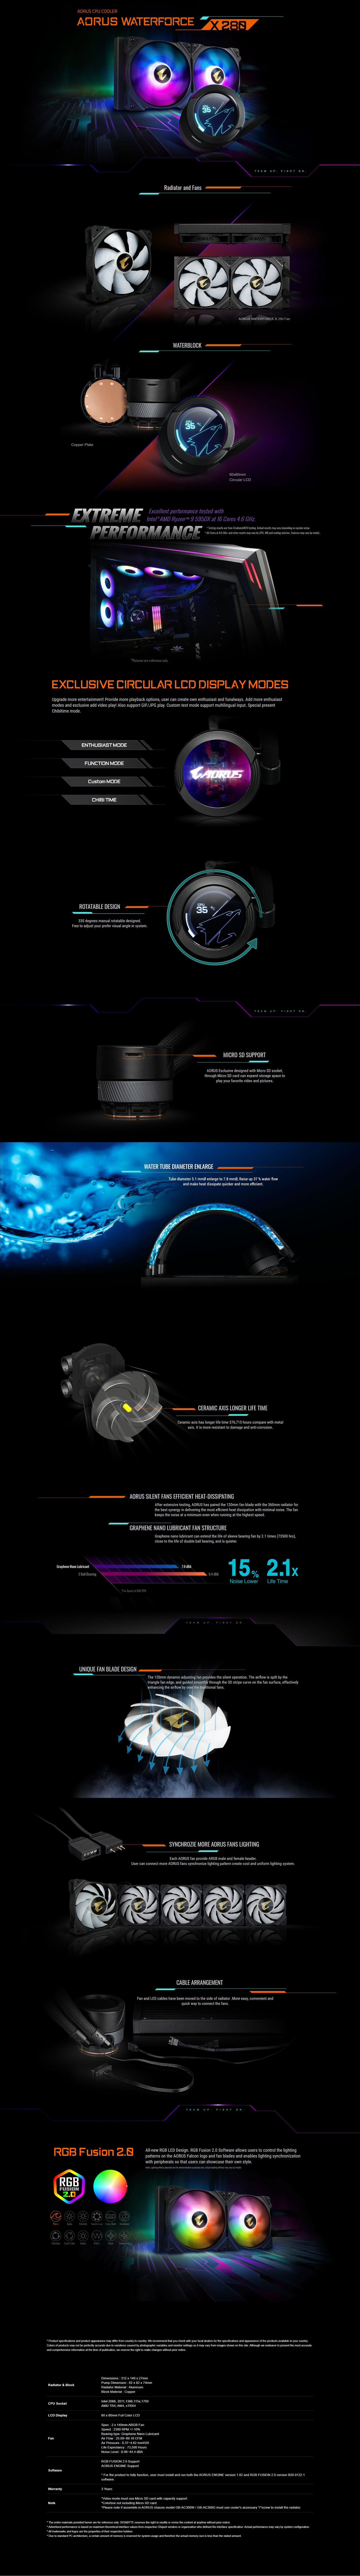 A large marketing image providing additional information about the product Gigabyte Aorus Waterforce X 280 RGB AIO Liquid Cooler 280mm - Additional alt info not provided